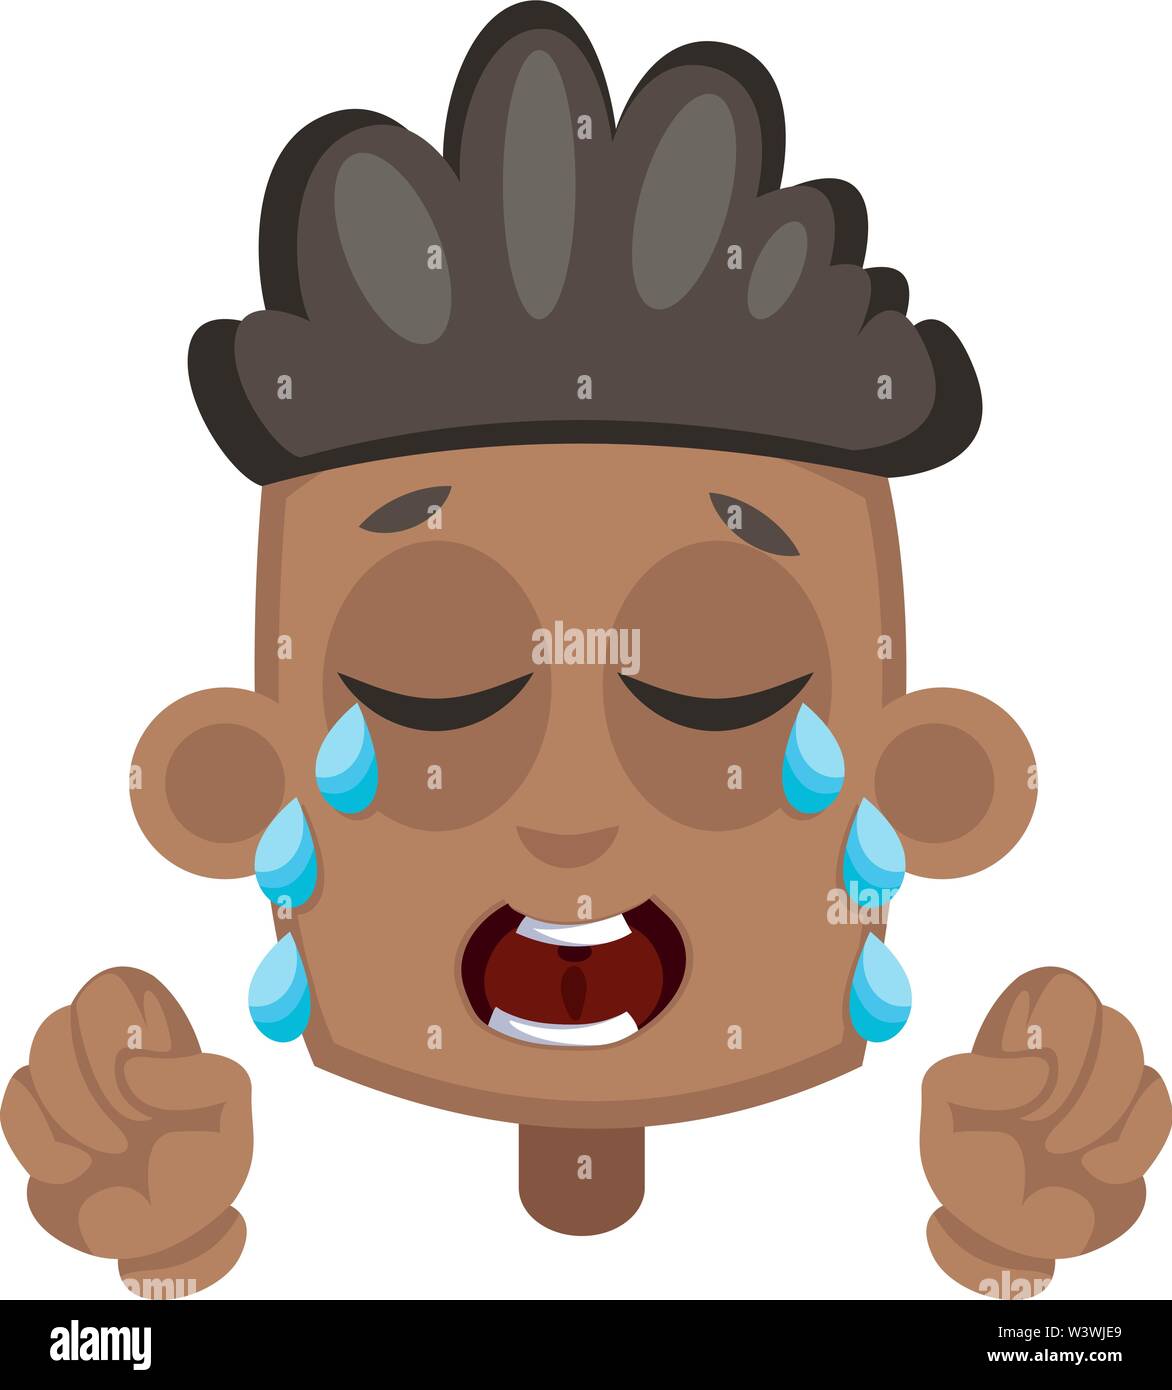 Boy is crying tears, illustration, vector on white background. Stock Vector